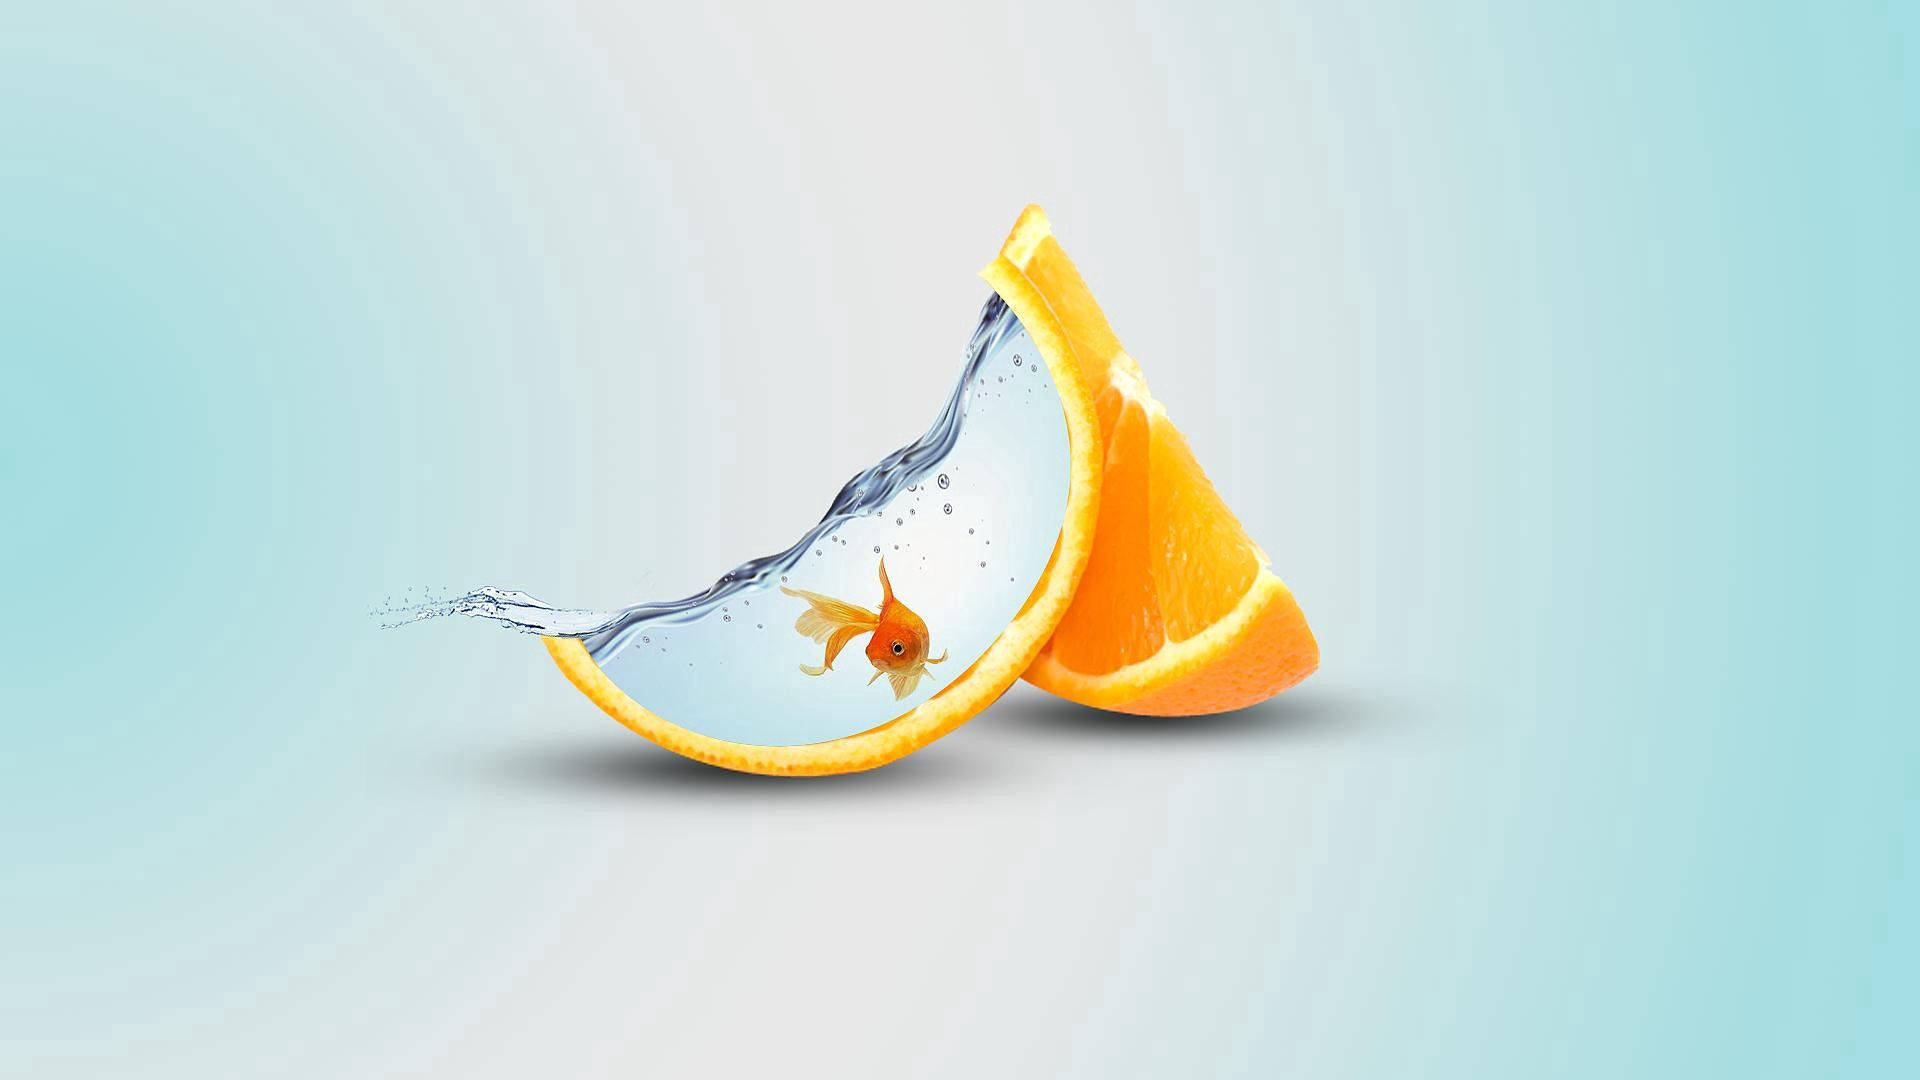 "Explore Endless Possibilities With Orange" Wallpaper